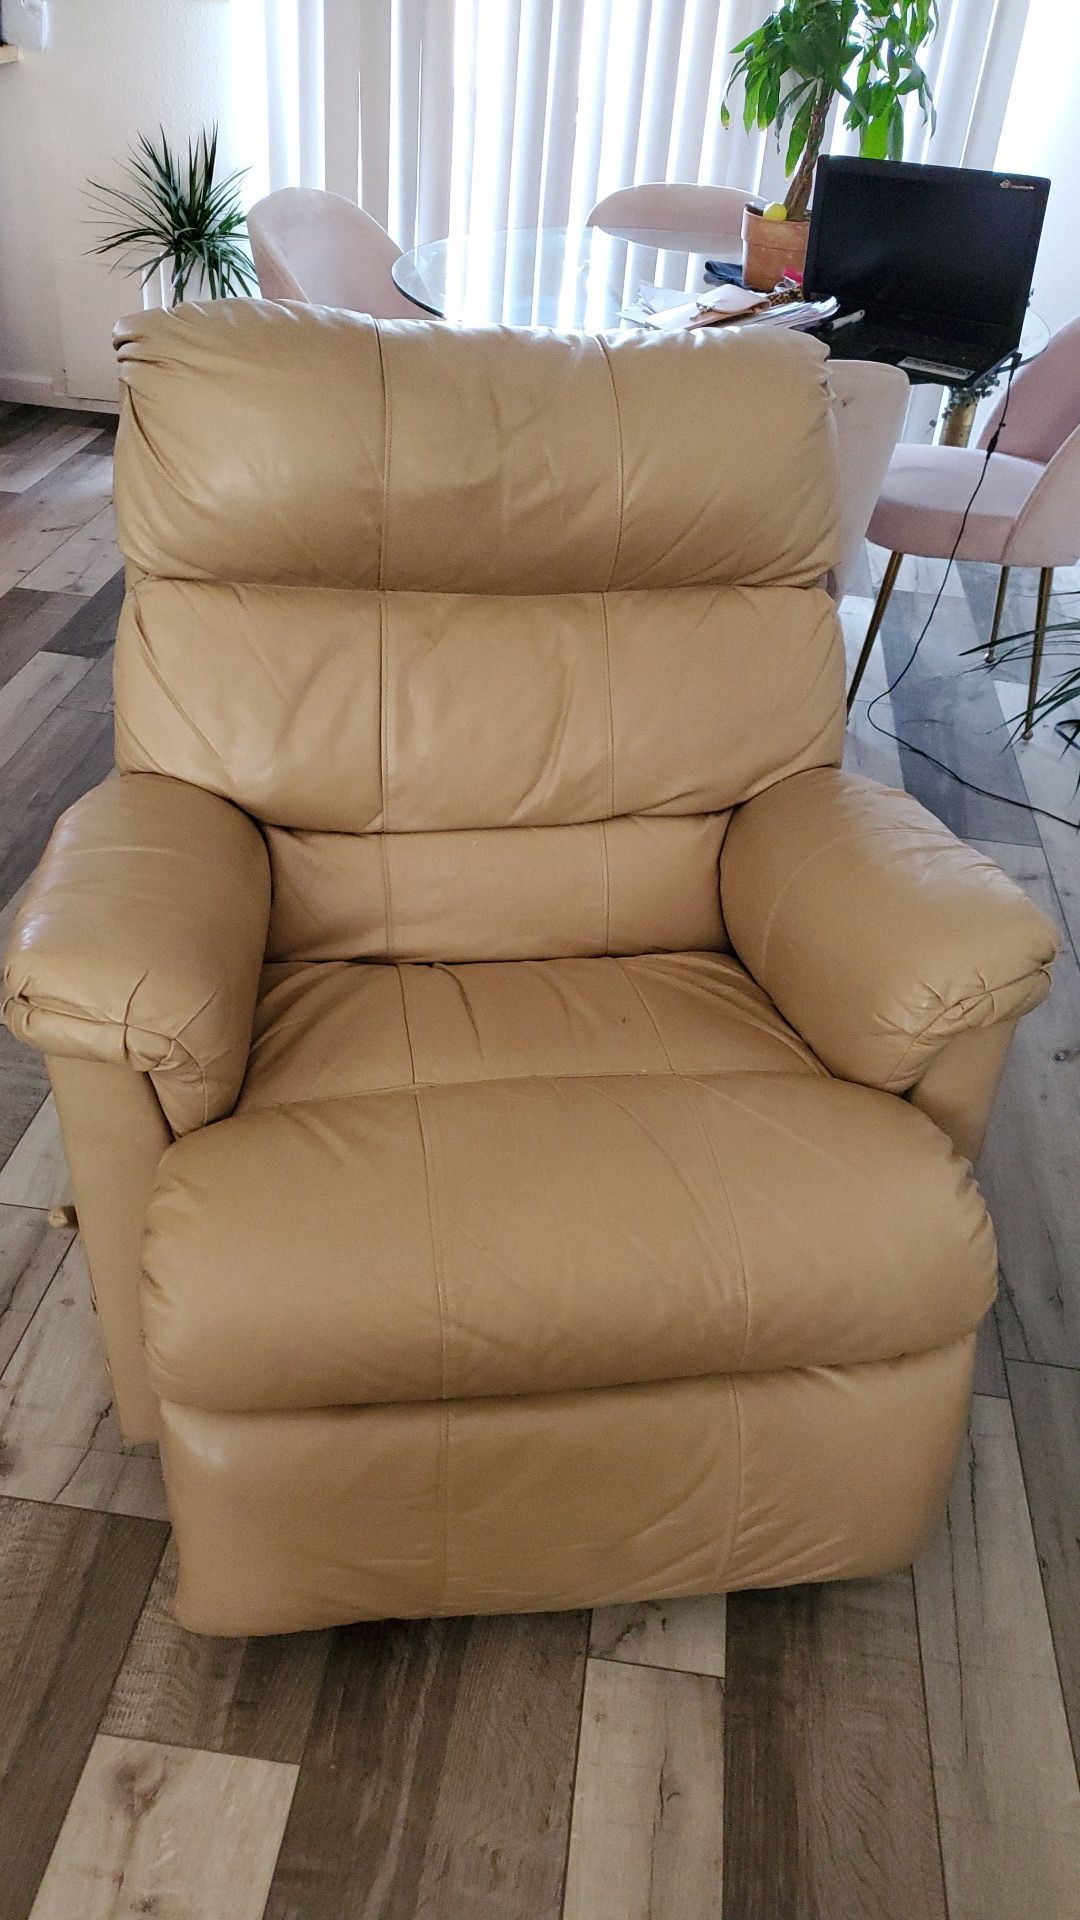 2 Leather lazy boy recliner